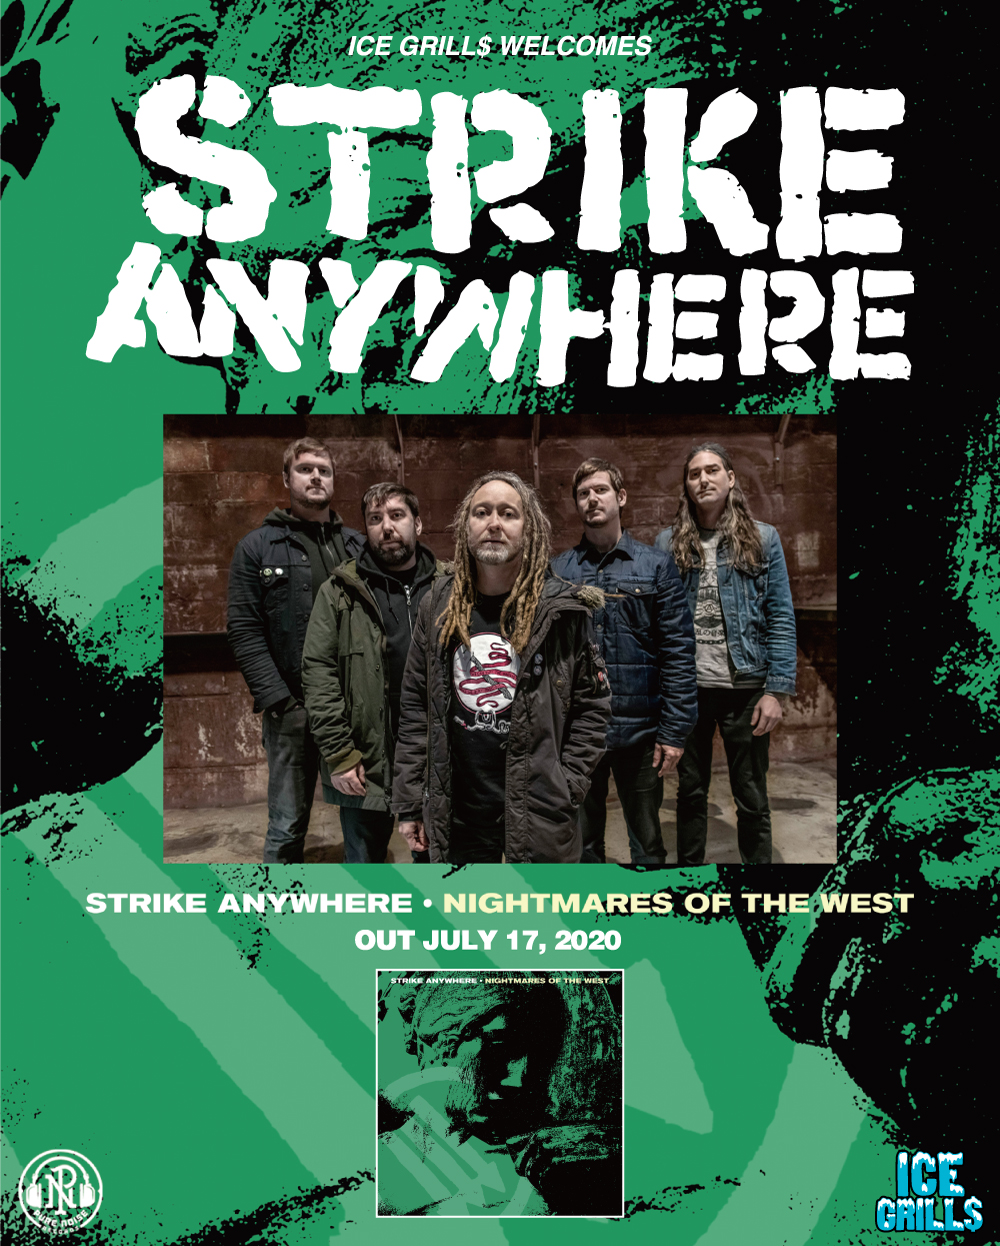 Strike Anywhere – New EP ‘Nightmares of the West’ out July 17, 2020